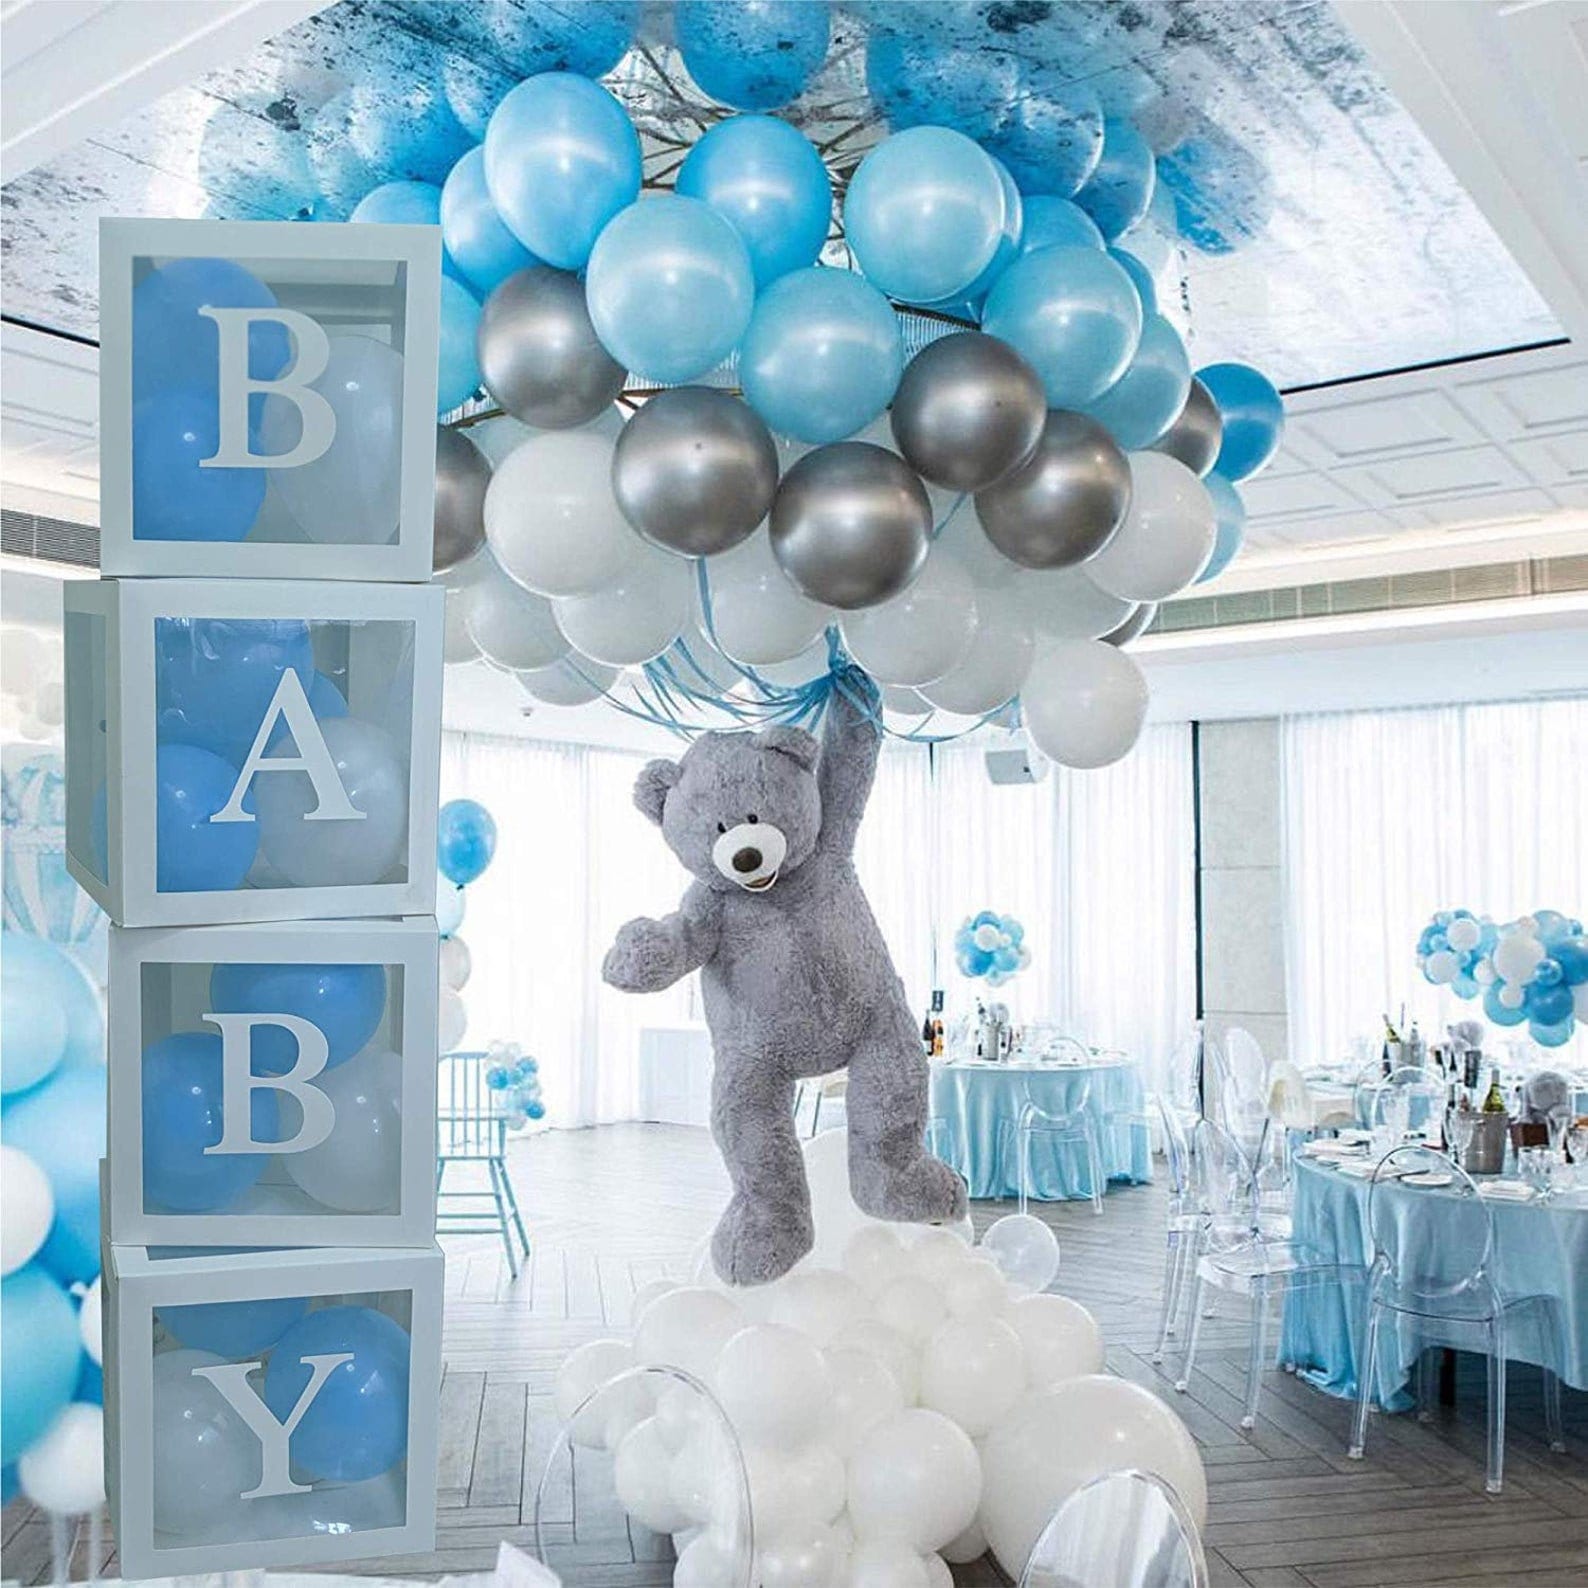 feste-besondere-anl-sse-nursery-rhyme-stories-helium-balloons-party-ware-decoration-baby